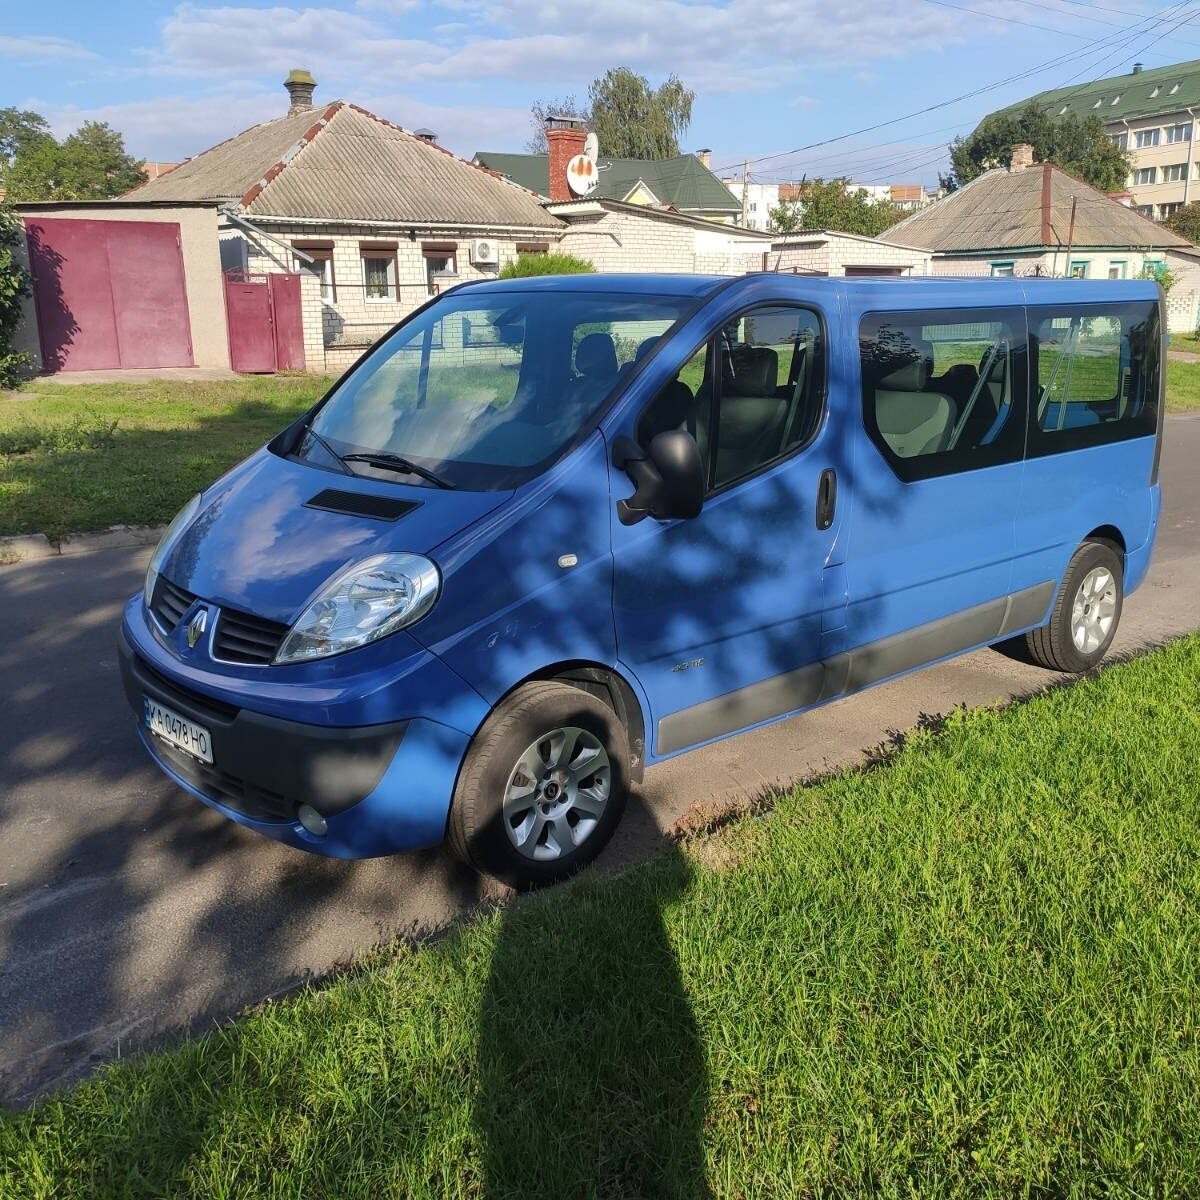 A new accessible van, painted blue